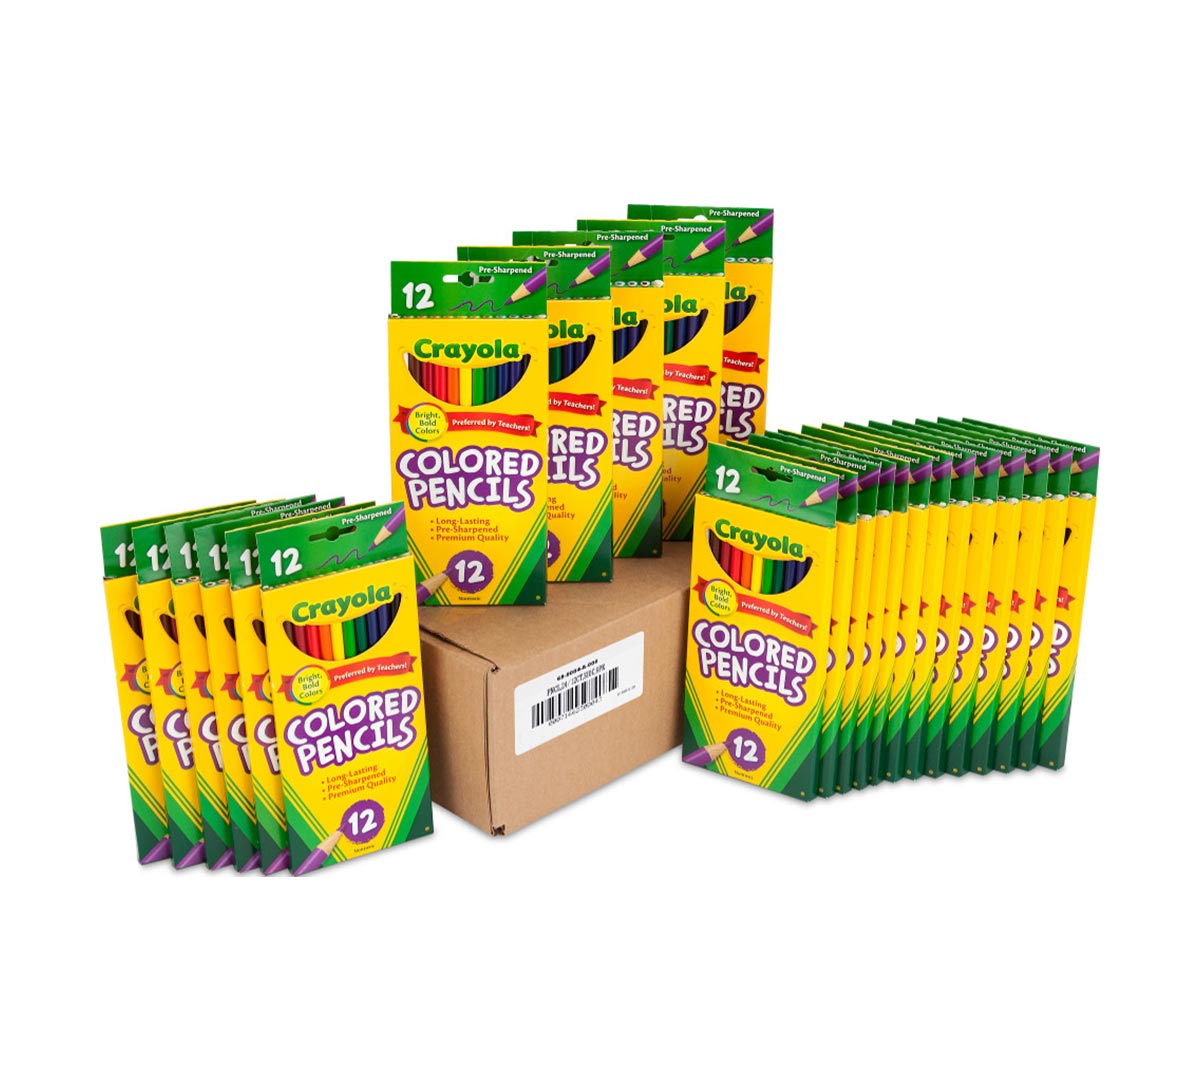 24 Box Classpack of 12 Count Long Colored Pencils | Crayola